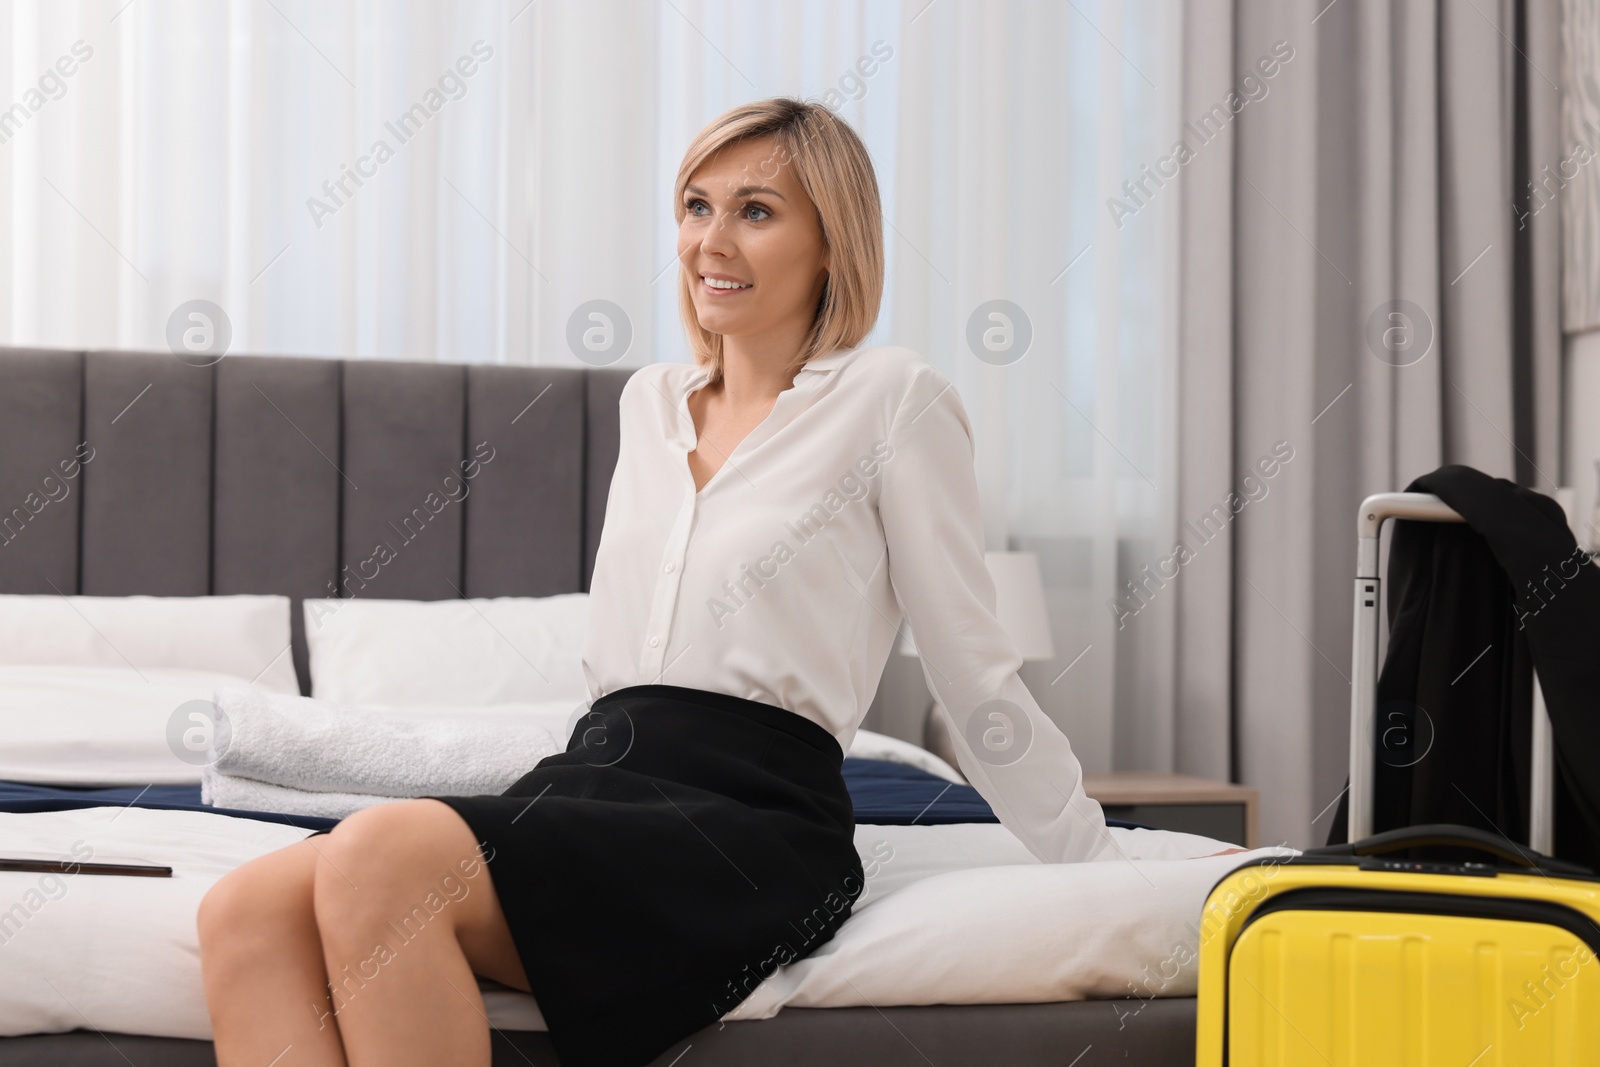 Photo of Smiling businesswoman relaxing on bed in stylish hotel room